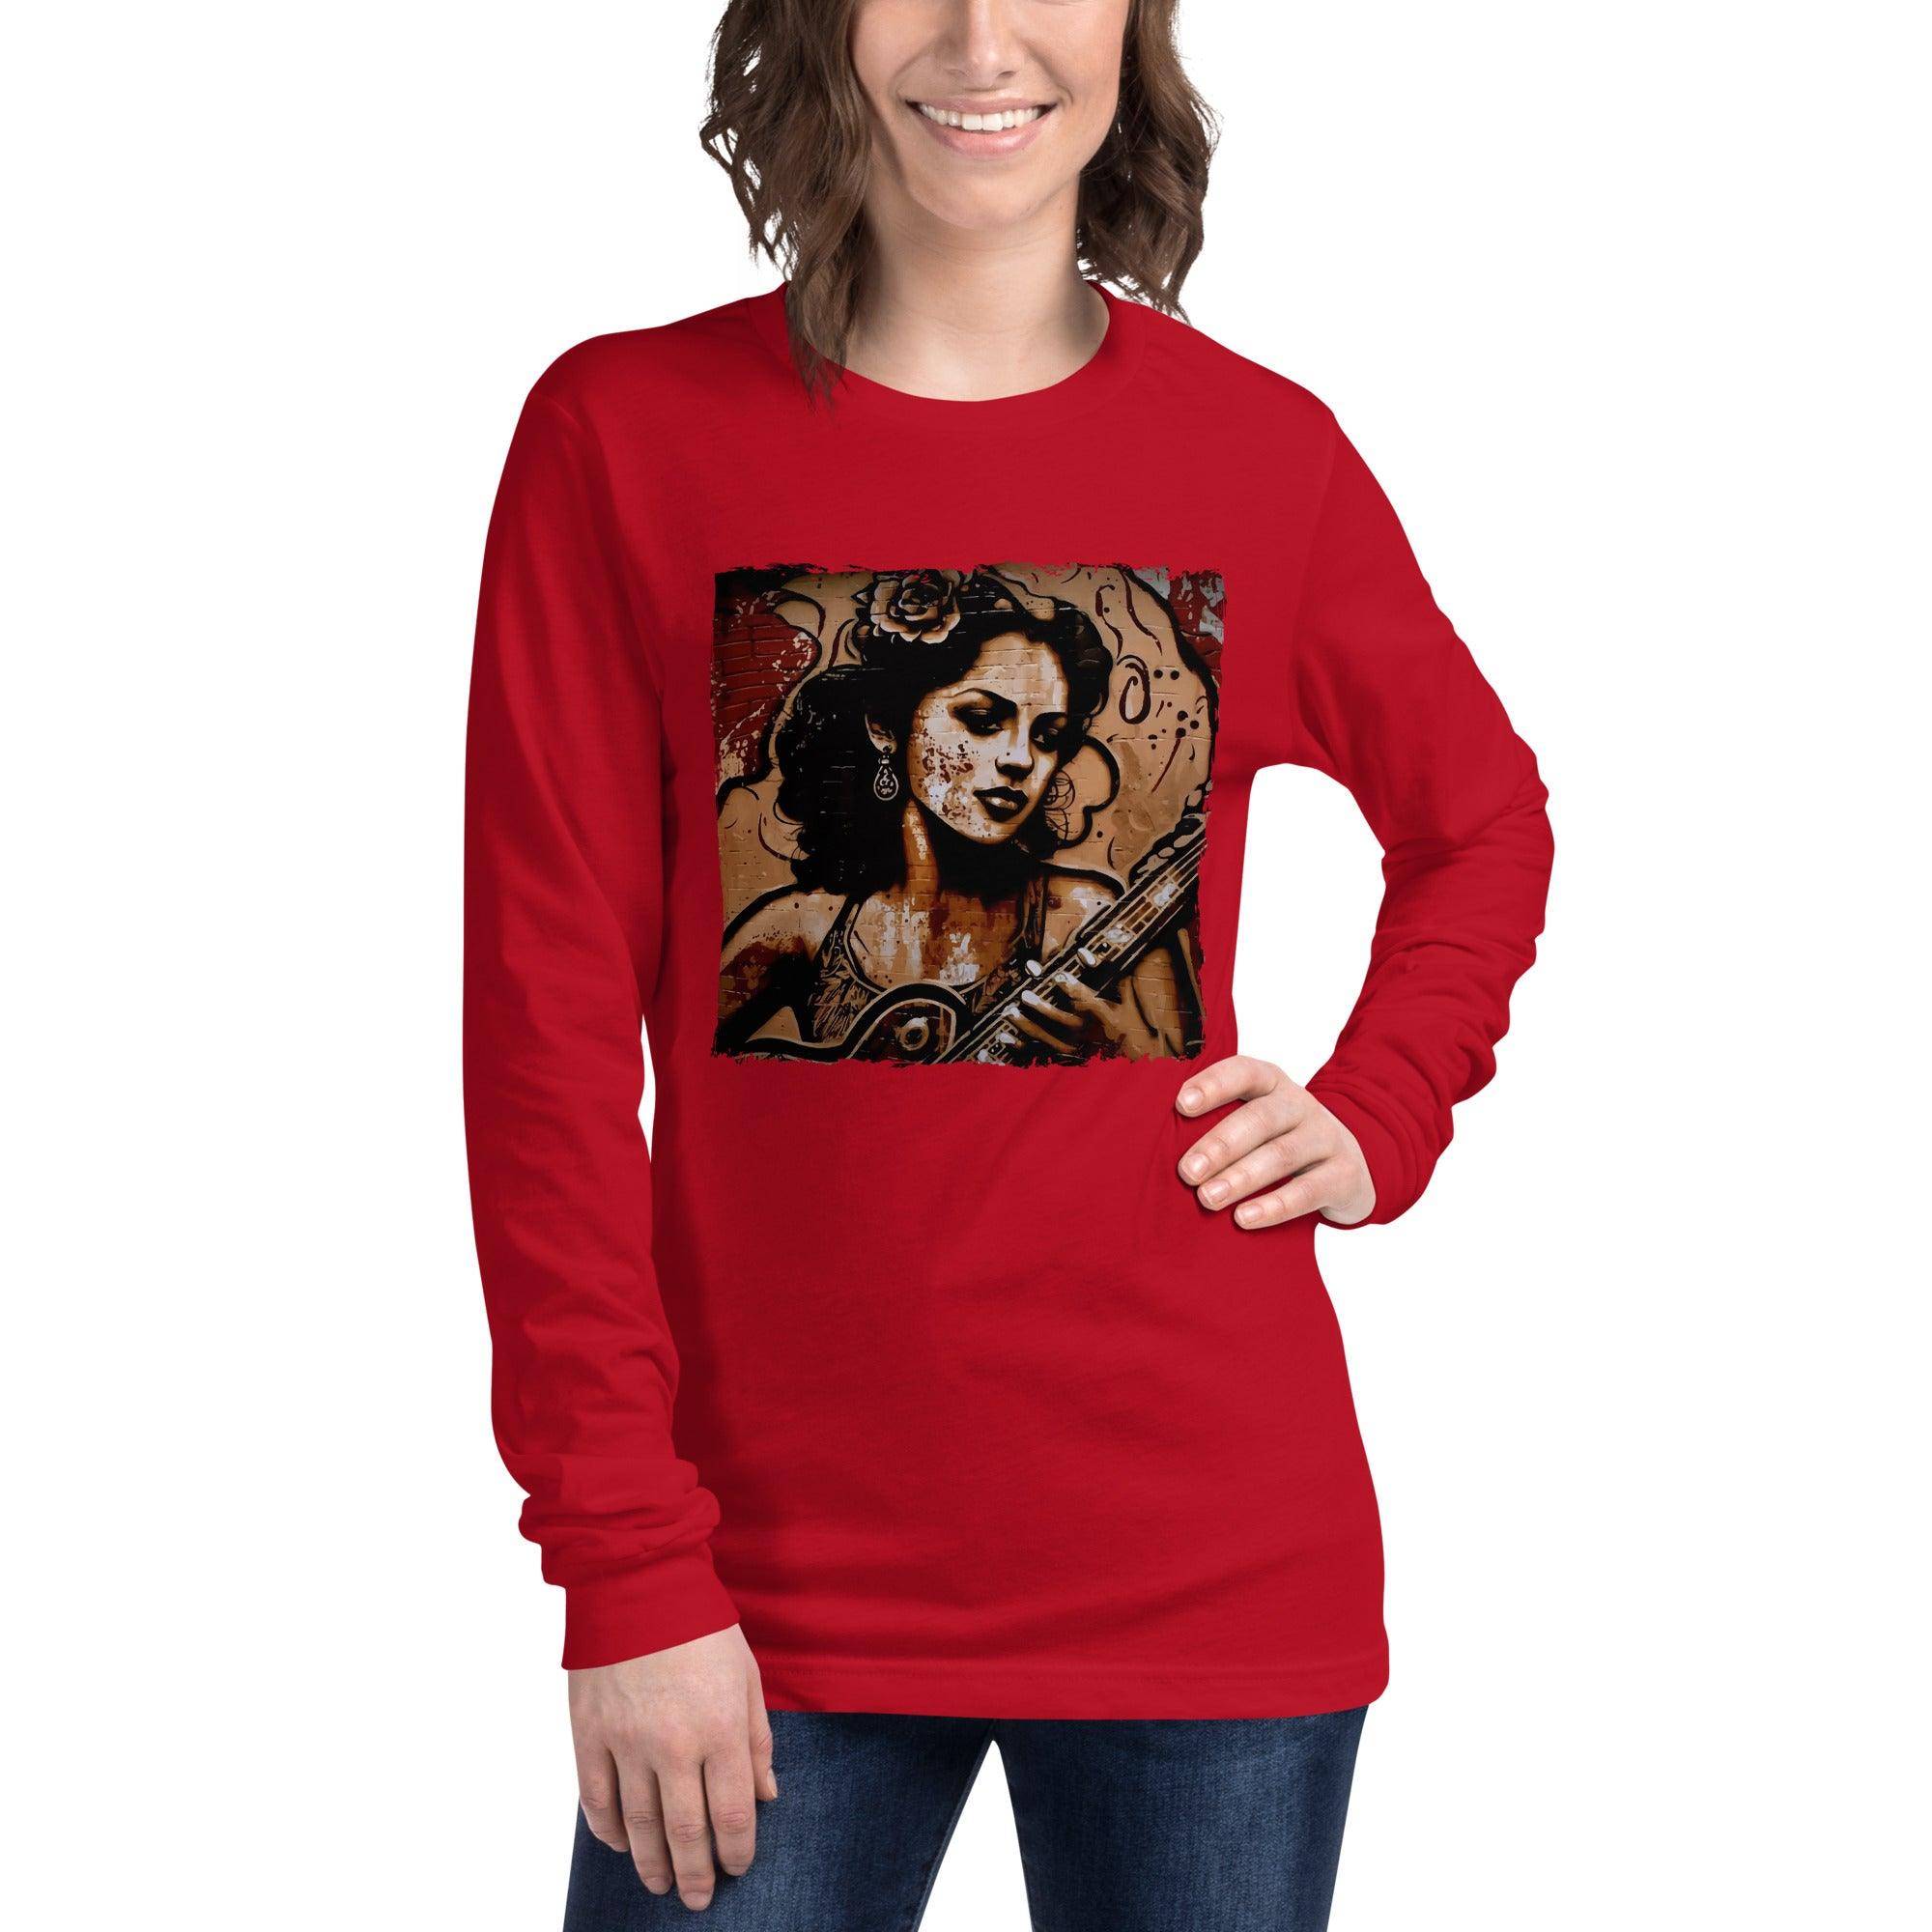 Flowing Passion Roaring Guitar Unisex Long Sleeve Tee - Beyond T-shirts